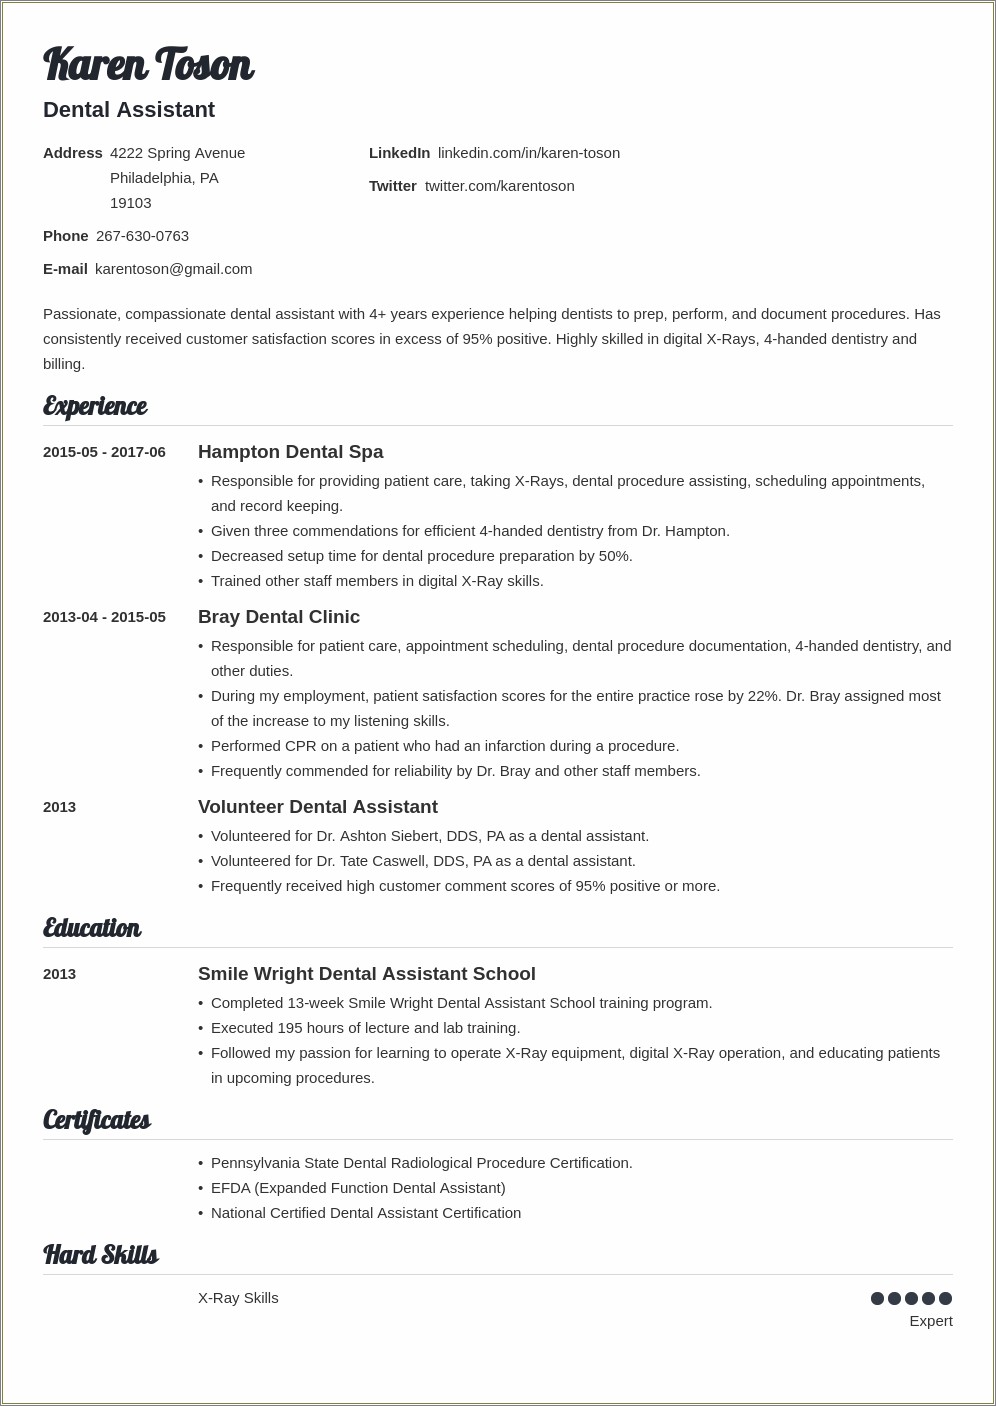 Resume Template For A Dental Assistant